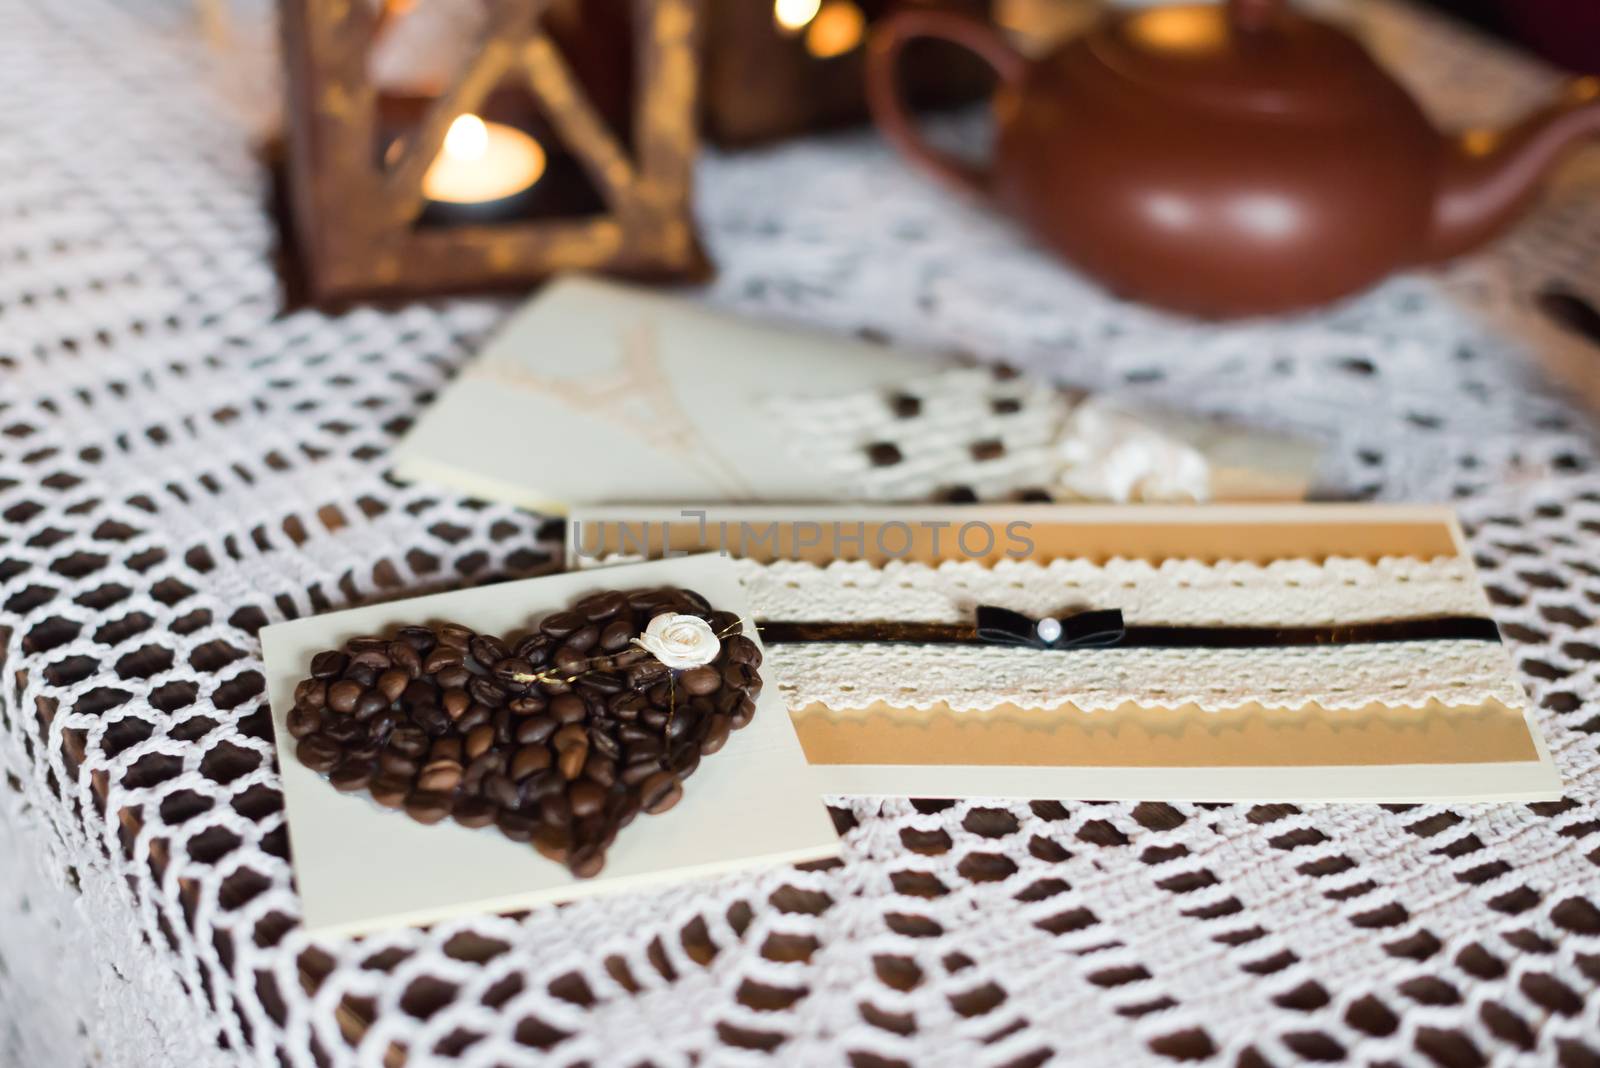 postcard with coffee beans in the shape of a heart is on the white tablecloth